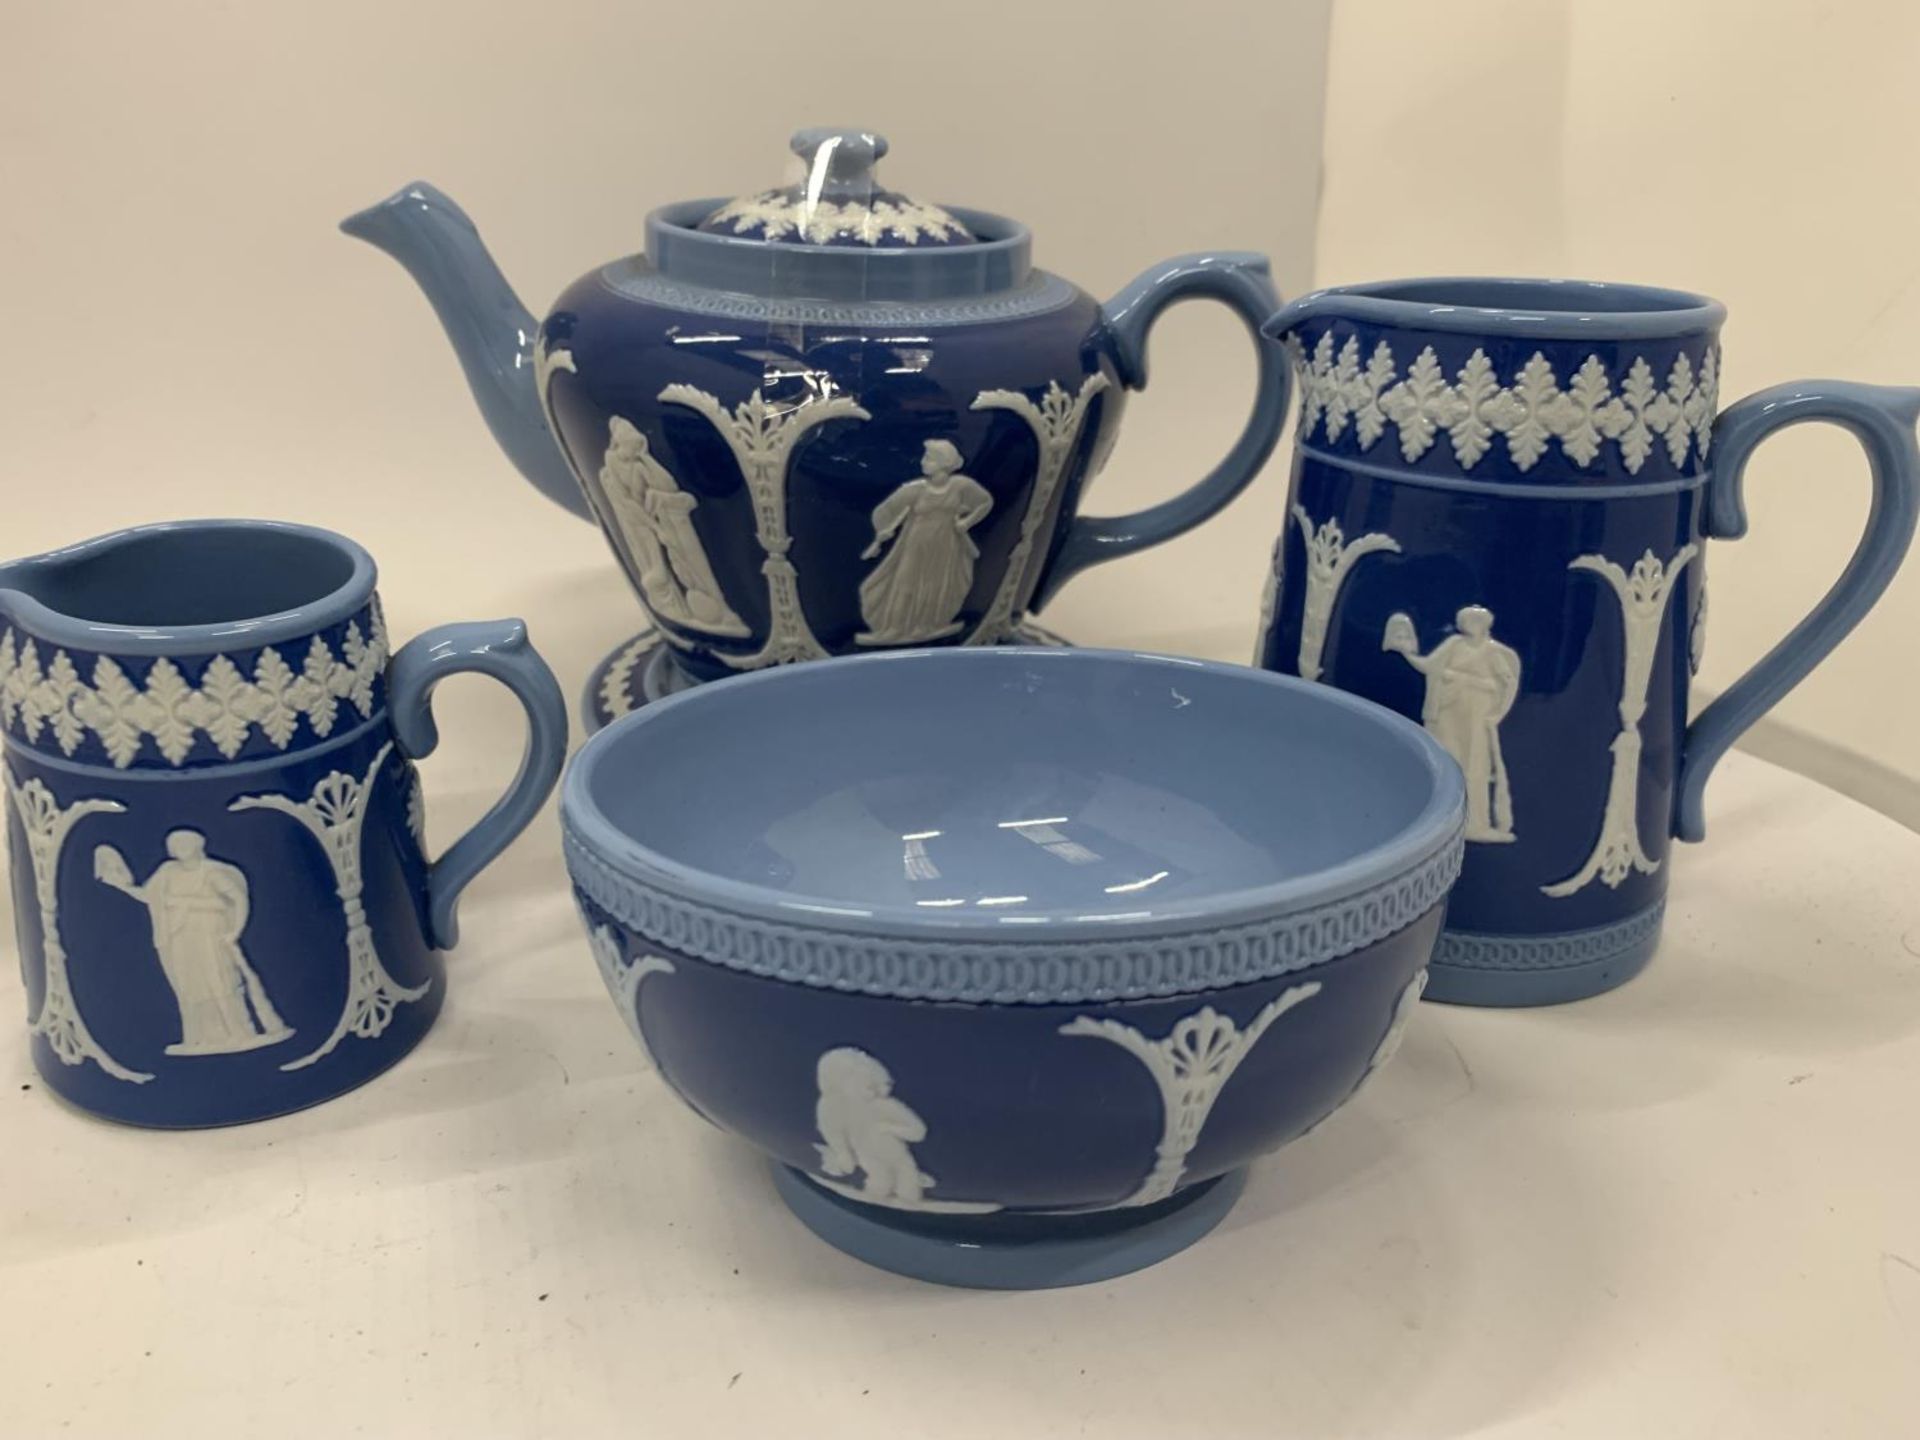 FOUR PIECES OF DUDSON POTTERY IN A JASPERWARE STYLE PATTERN TO INCLUDE A TEAPOT AND STAND, JUGS - Image 8 of 8